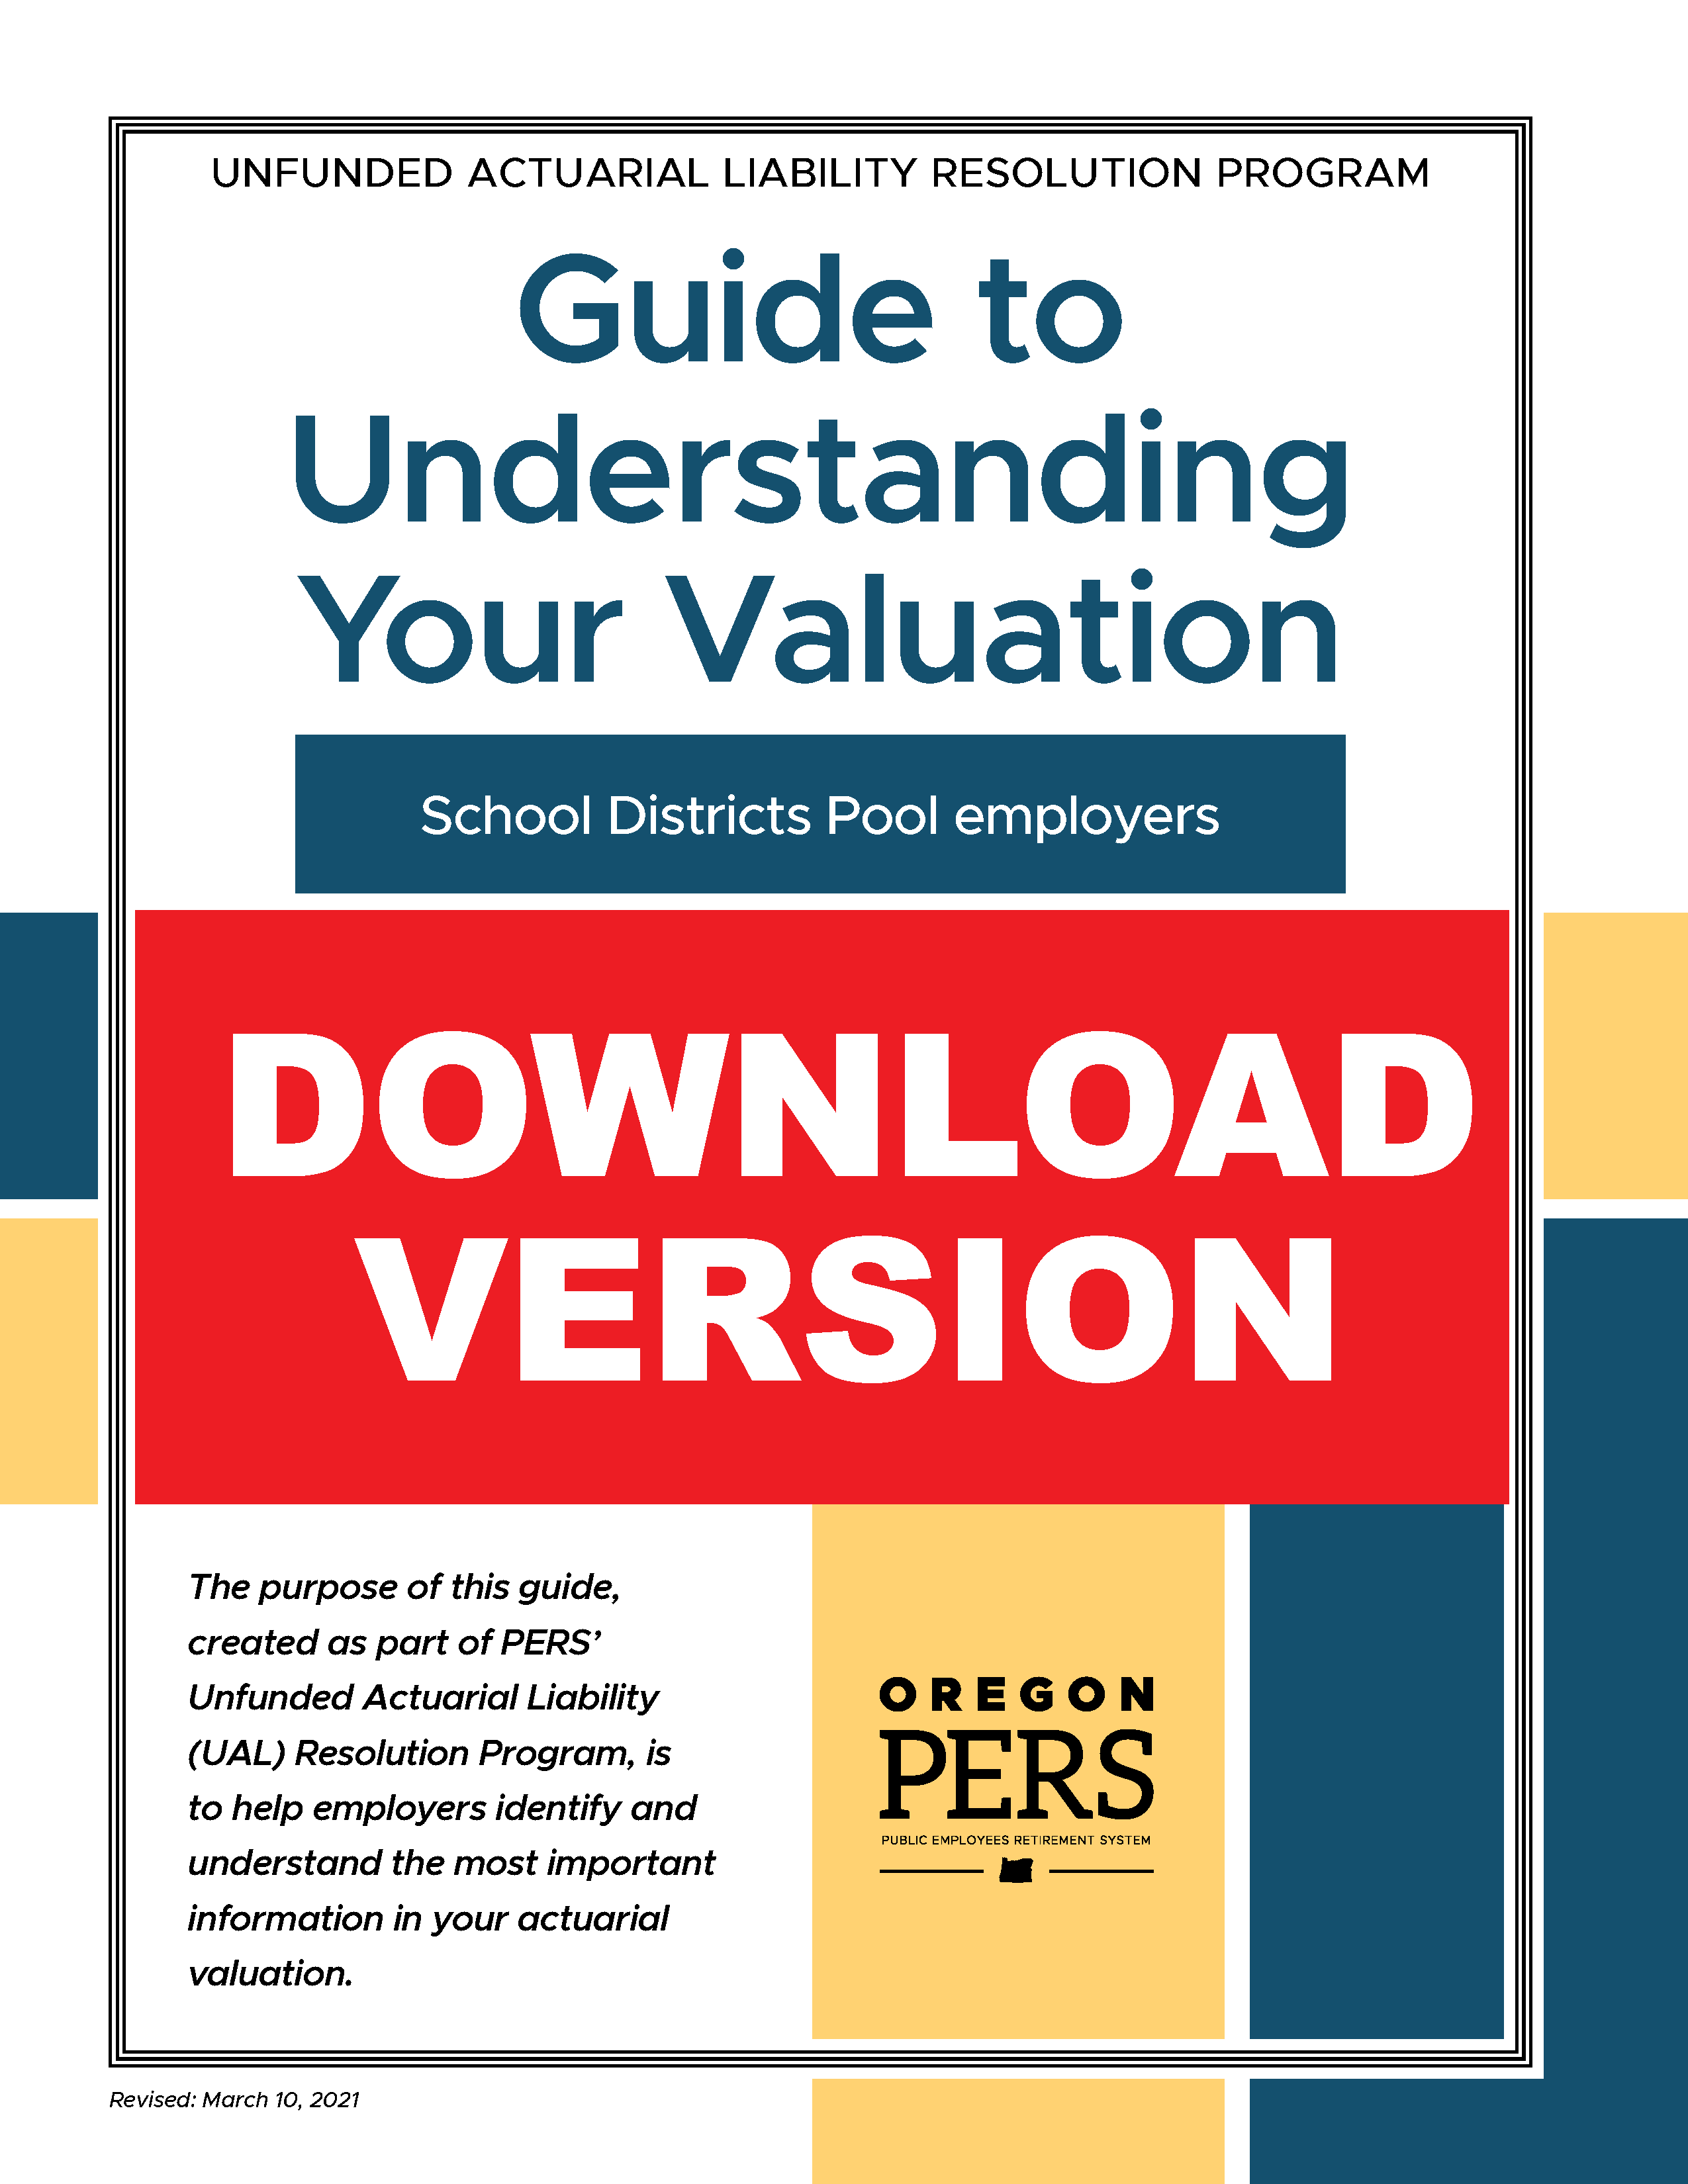 Cover image for PDF document Guide to Understanding Your Valuation - School Districts Pool download version